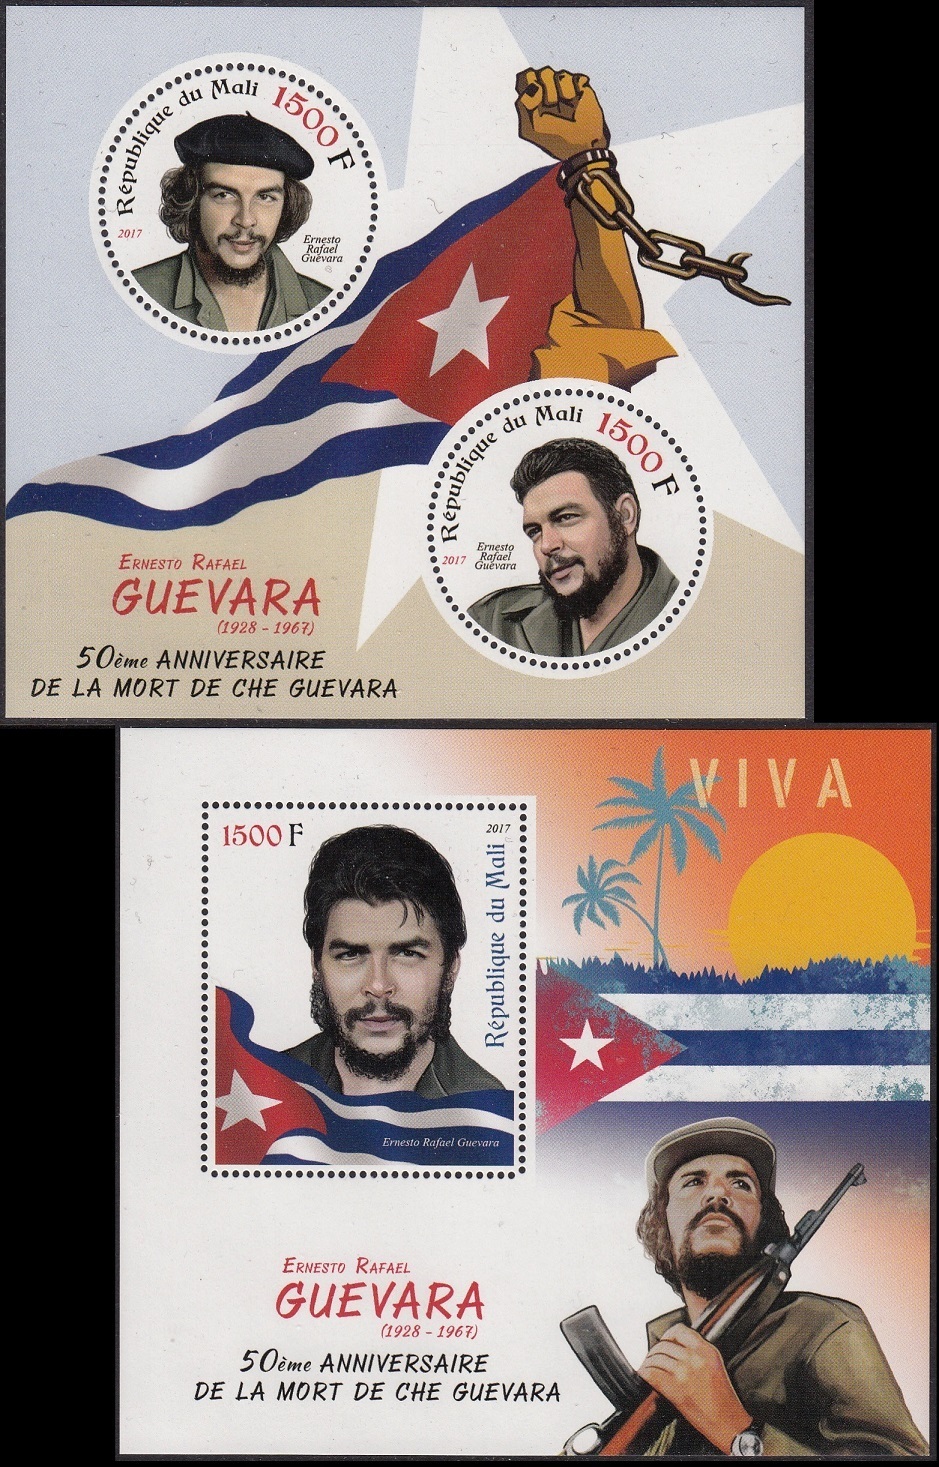 Che Guevara (1928-1967), American Experience, Official Site